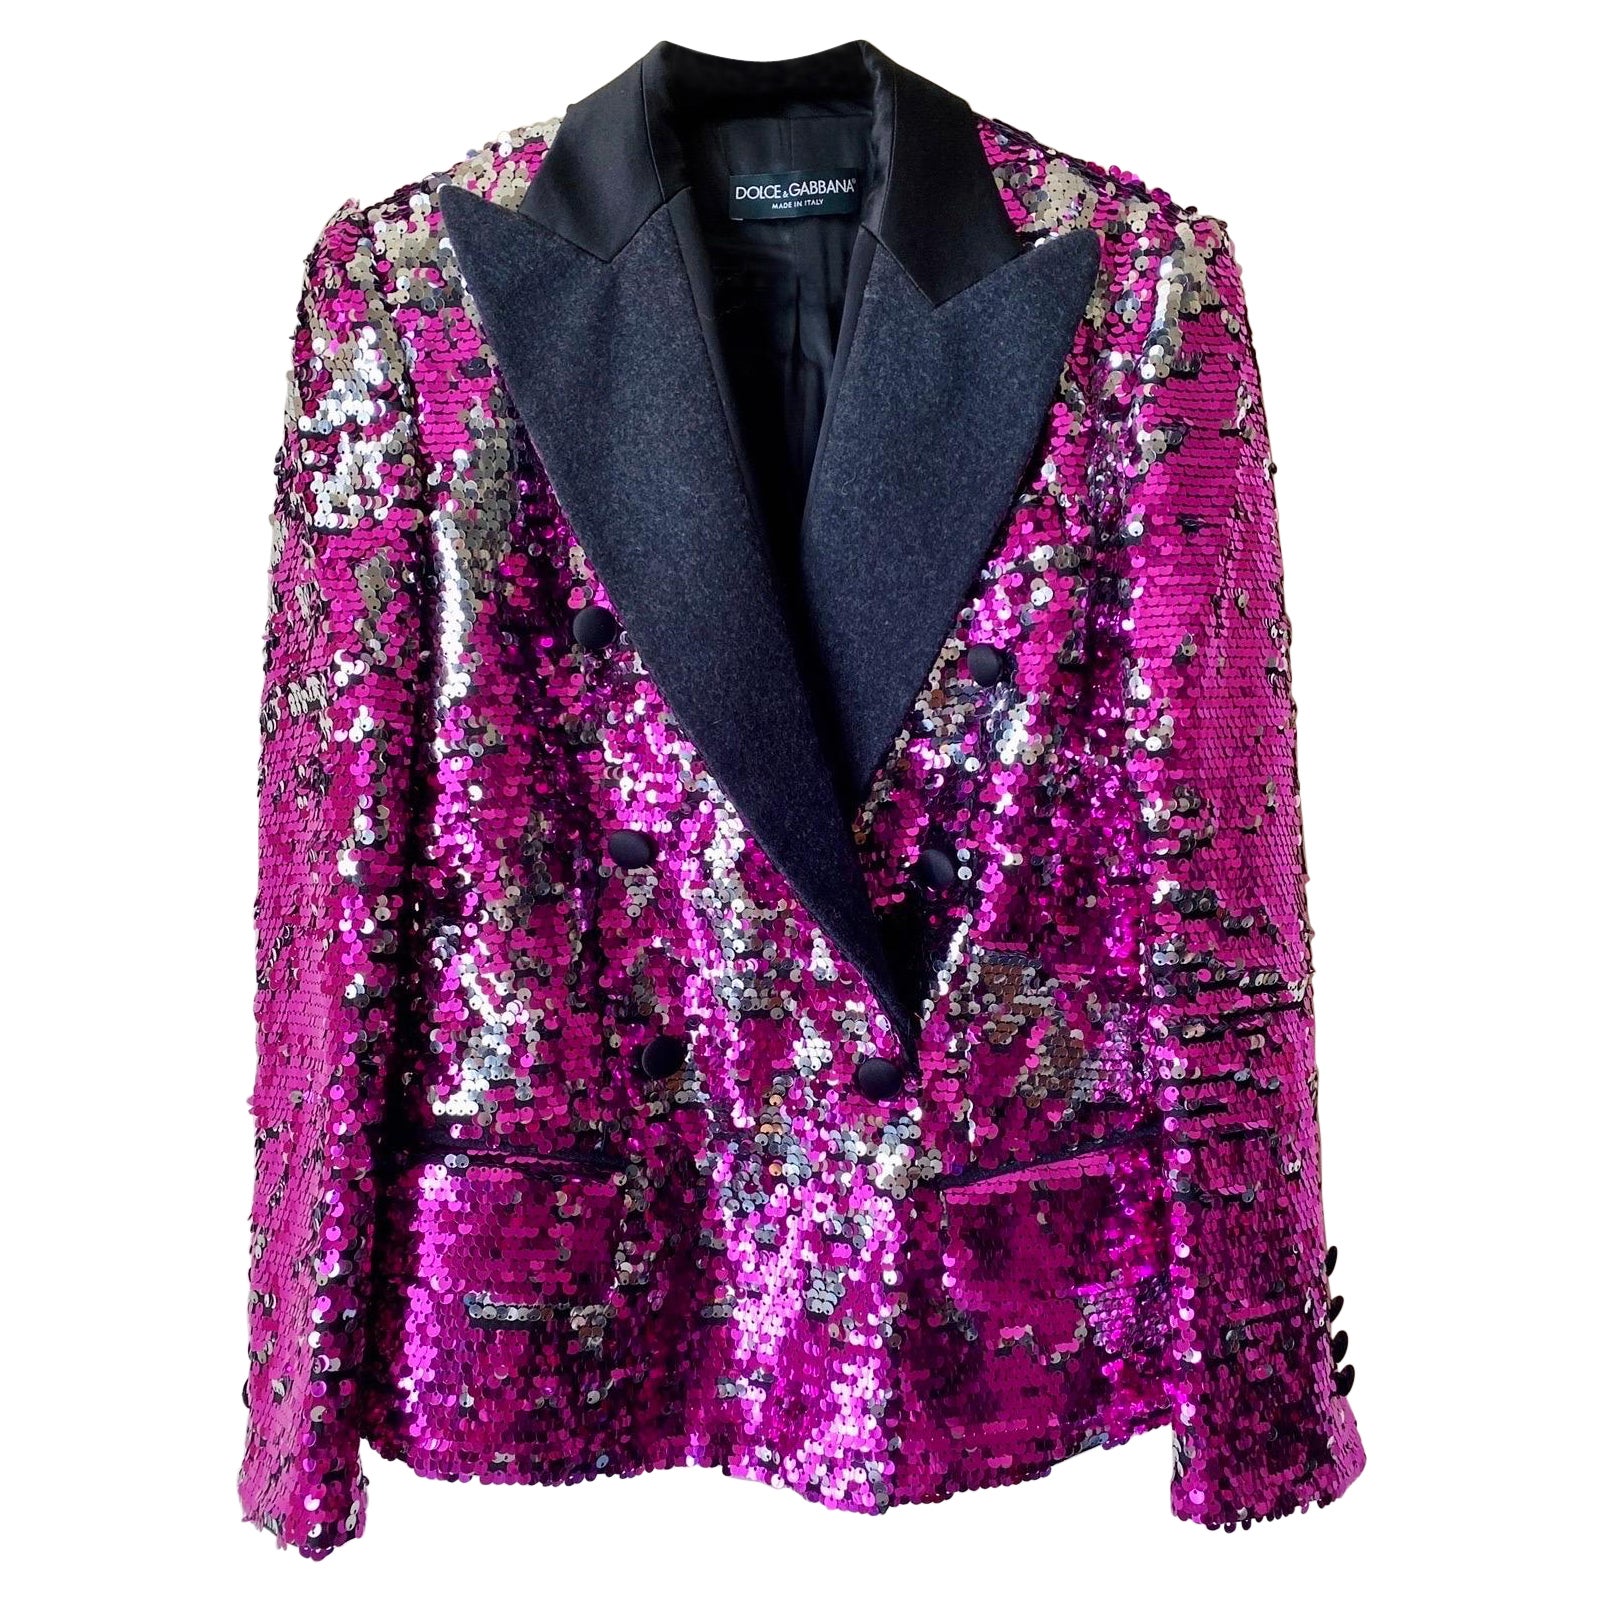 Dolce & Gabbana runway 2011 pink sequined jacket  For Sale